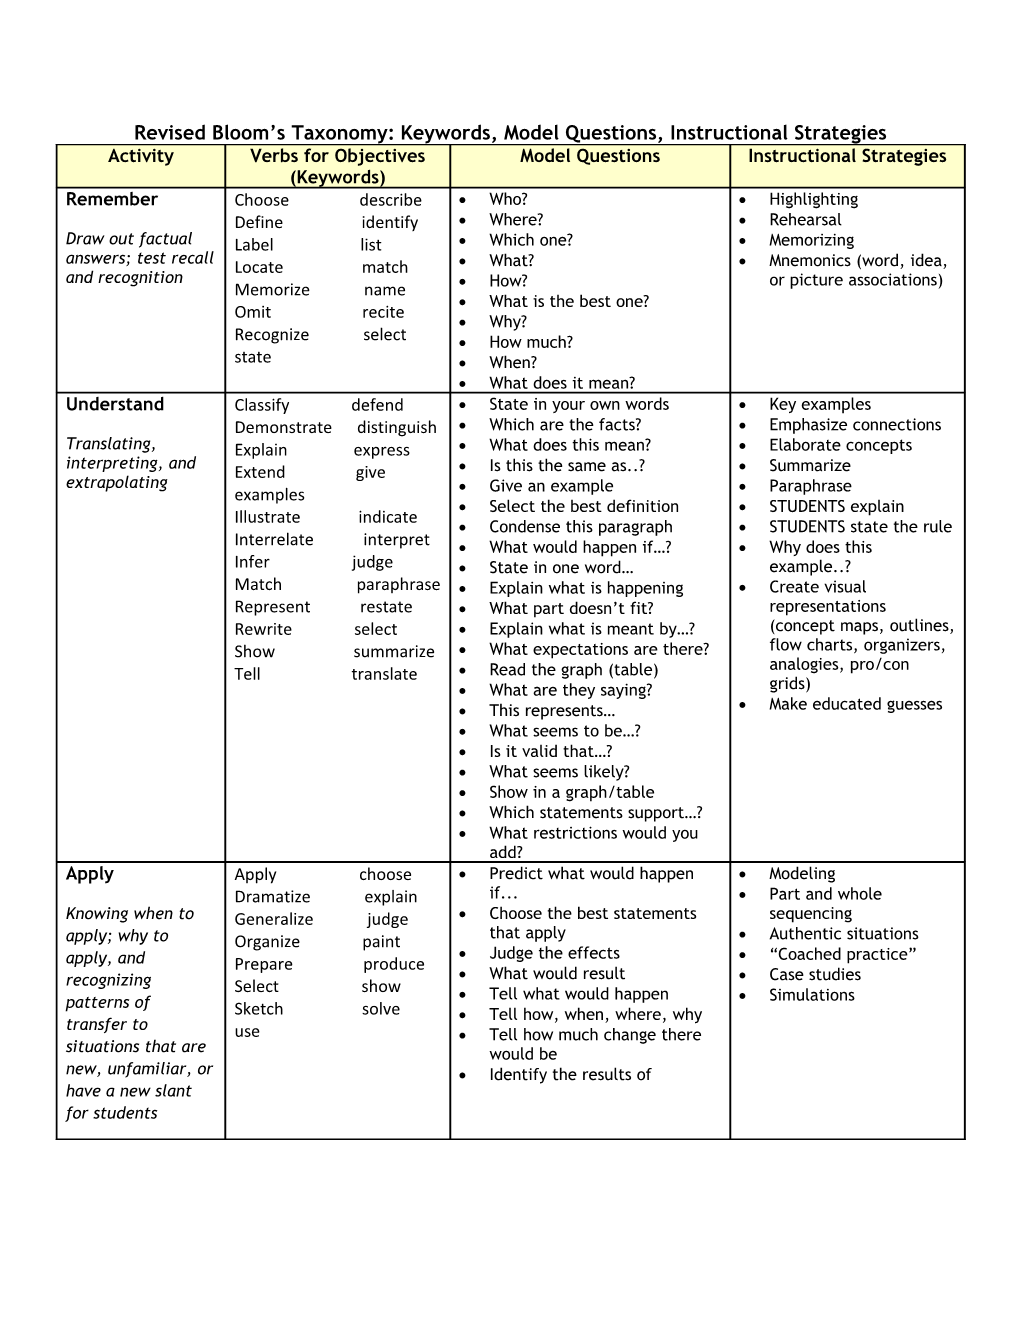 Revised Bloom S Taxonomy:Keywords, Model Questions, Instructional Strategies